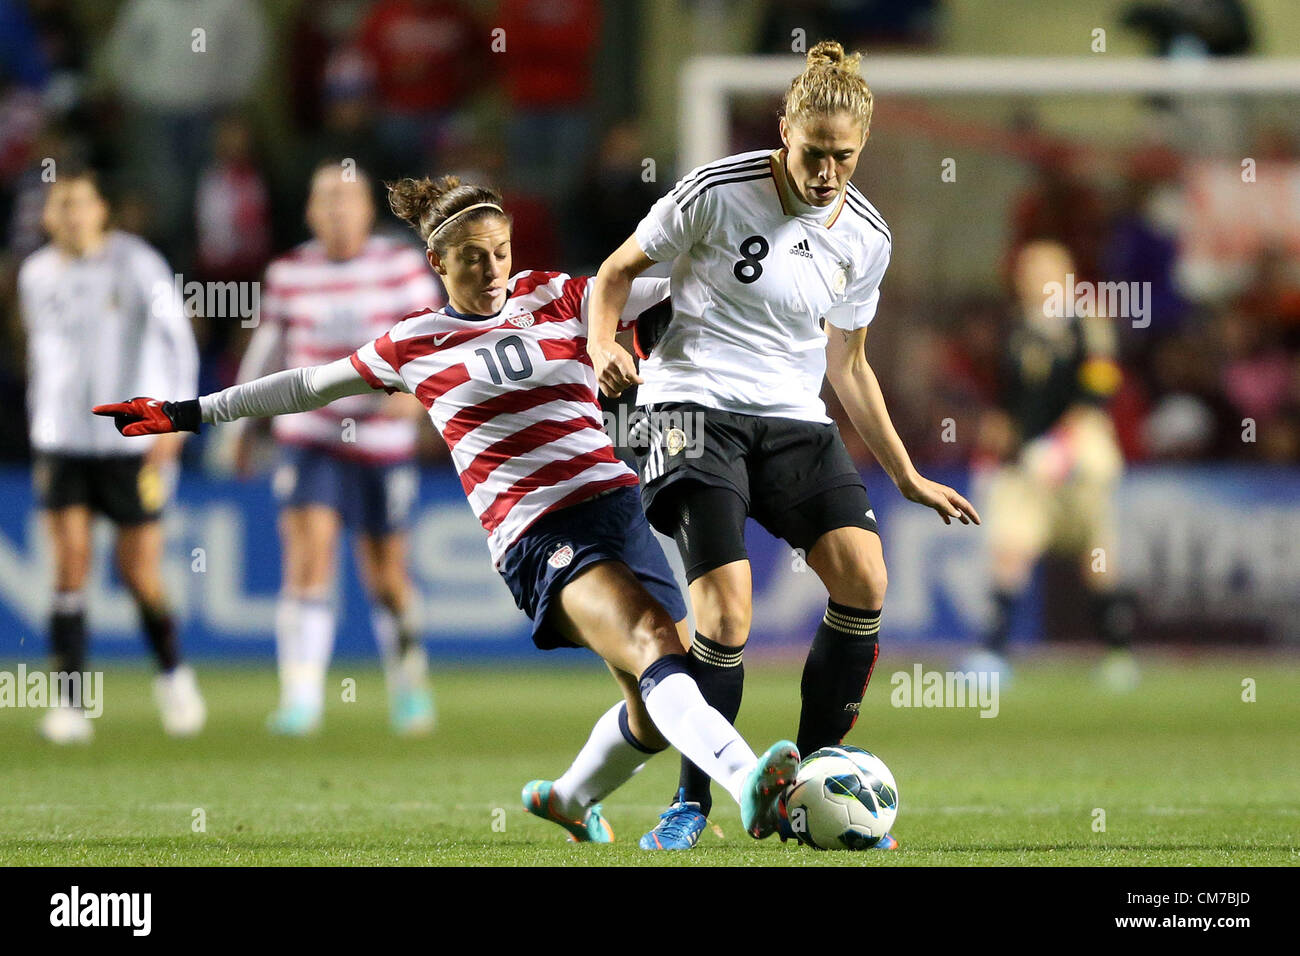 20.10.2012. Chicago, USA.  Carli Lloyd (USA) (10) tackles the ball away from Kim Kulig (GER) (8). The United States Women's National Team played the Germany Women's National Team at Toyota Park in Bridgeview, Illinois in a women's international friendly soccer match. The game ended in a 1-1 tie. Stock Photo